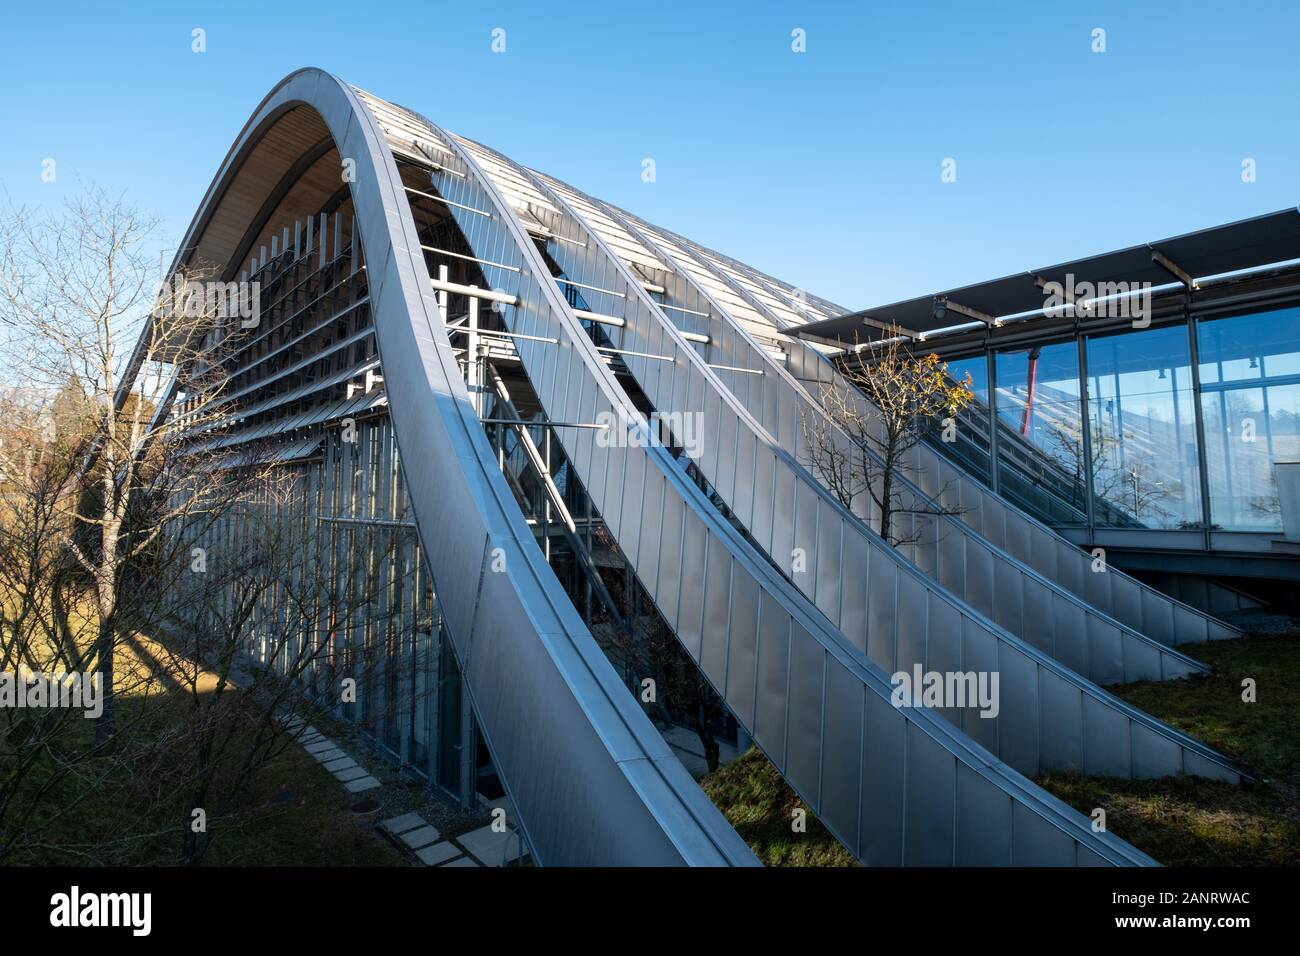 Zentrum Paul Klee, Bern Switzerland, art gallery dedicated to the artist  Paul Klee. The building has a green roof and is designed by Renzo Piano  Stock Photo - Alamy